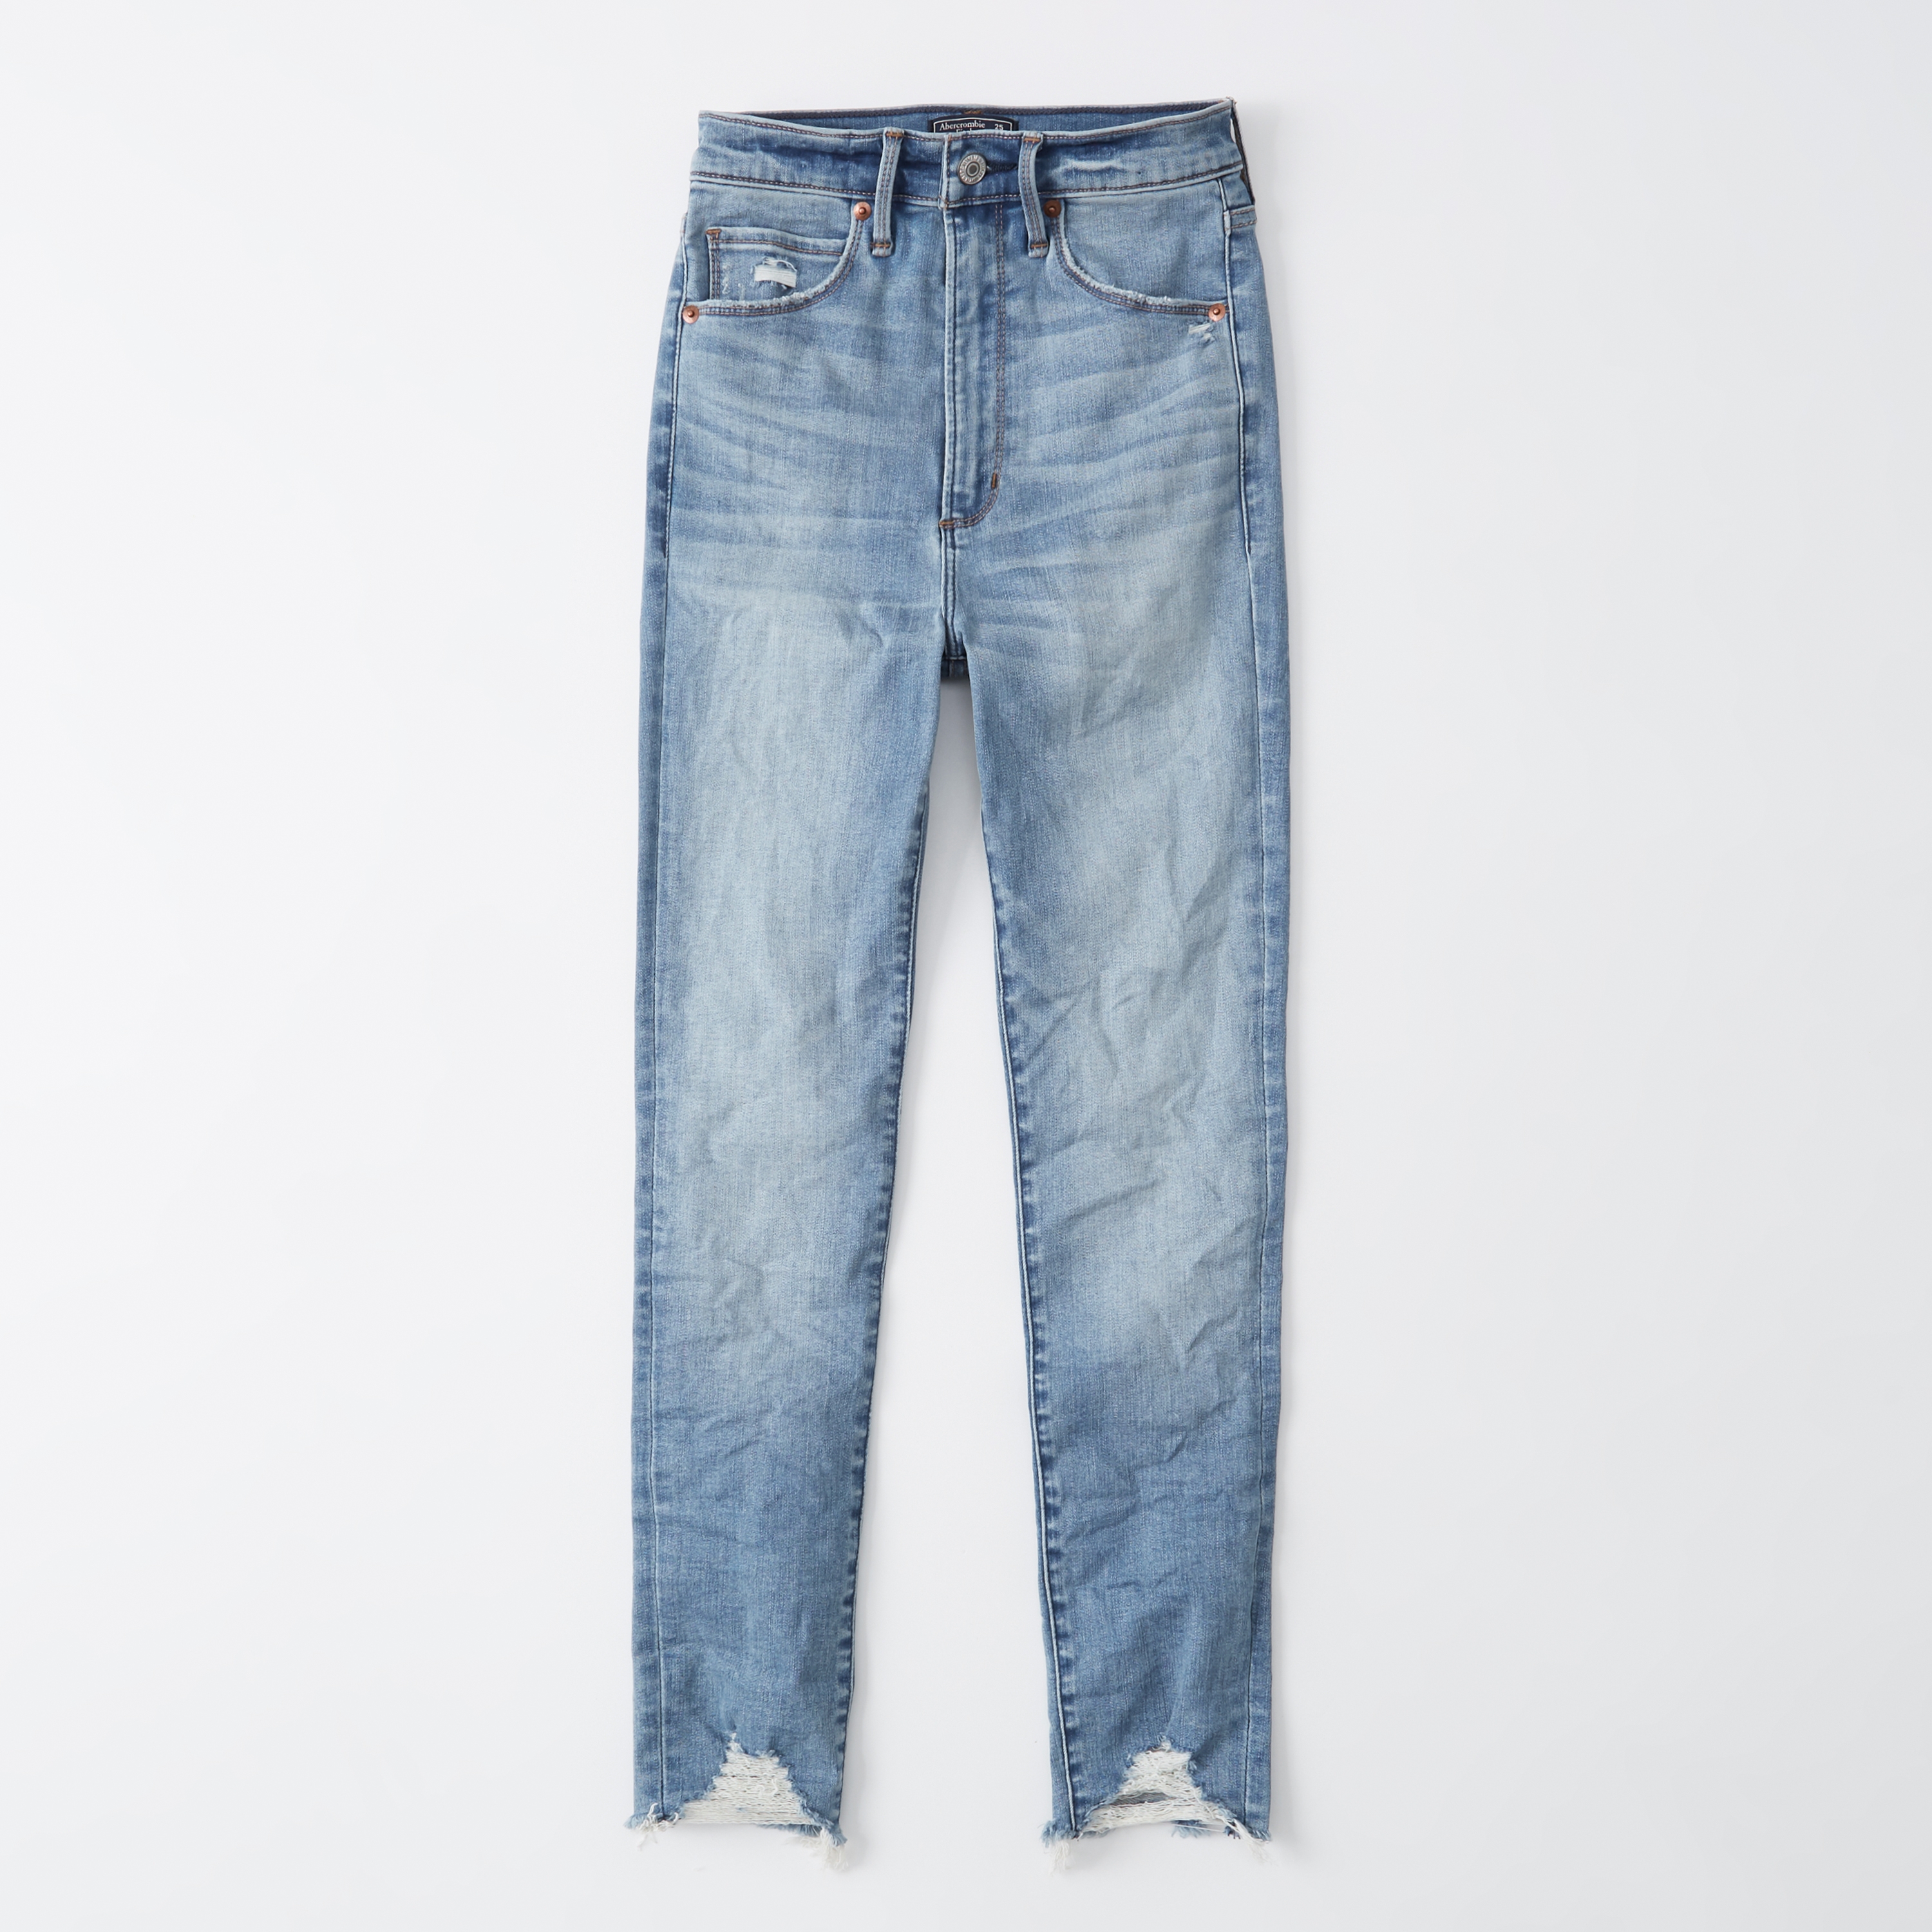 abercrombie button fly jeans